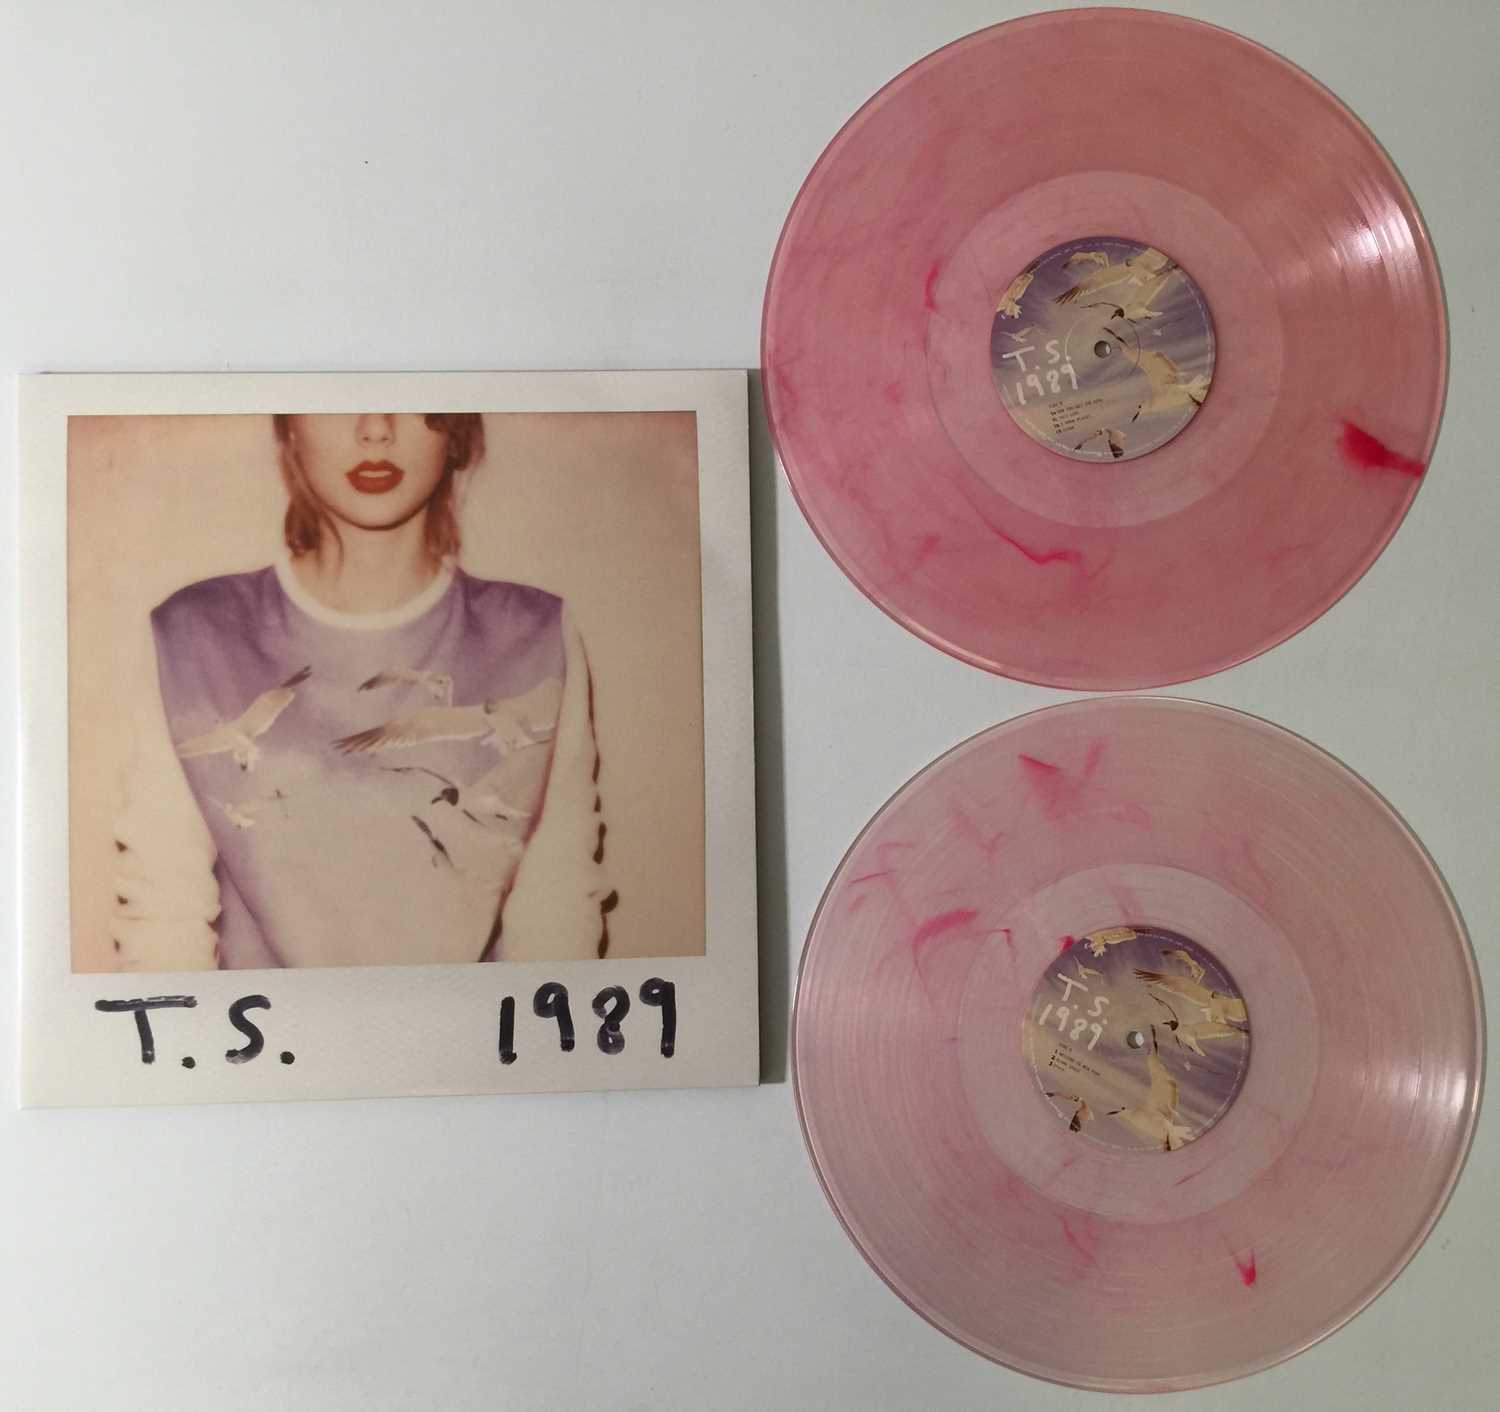 Lot 191 TAYLOR SWIFT 1989 LP (2018 LIMITED EDITION